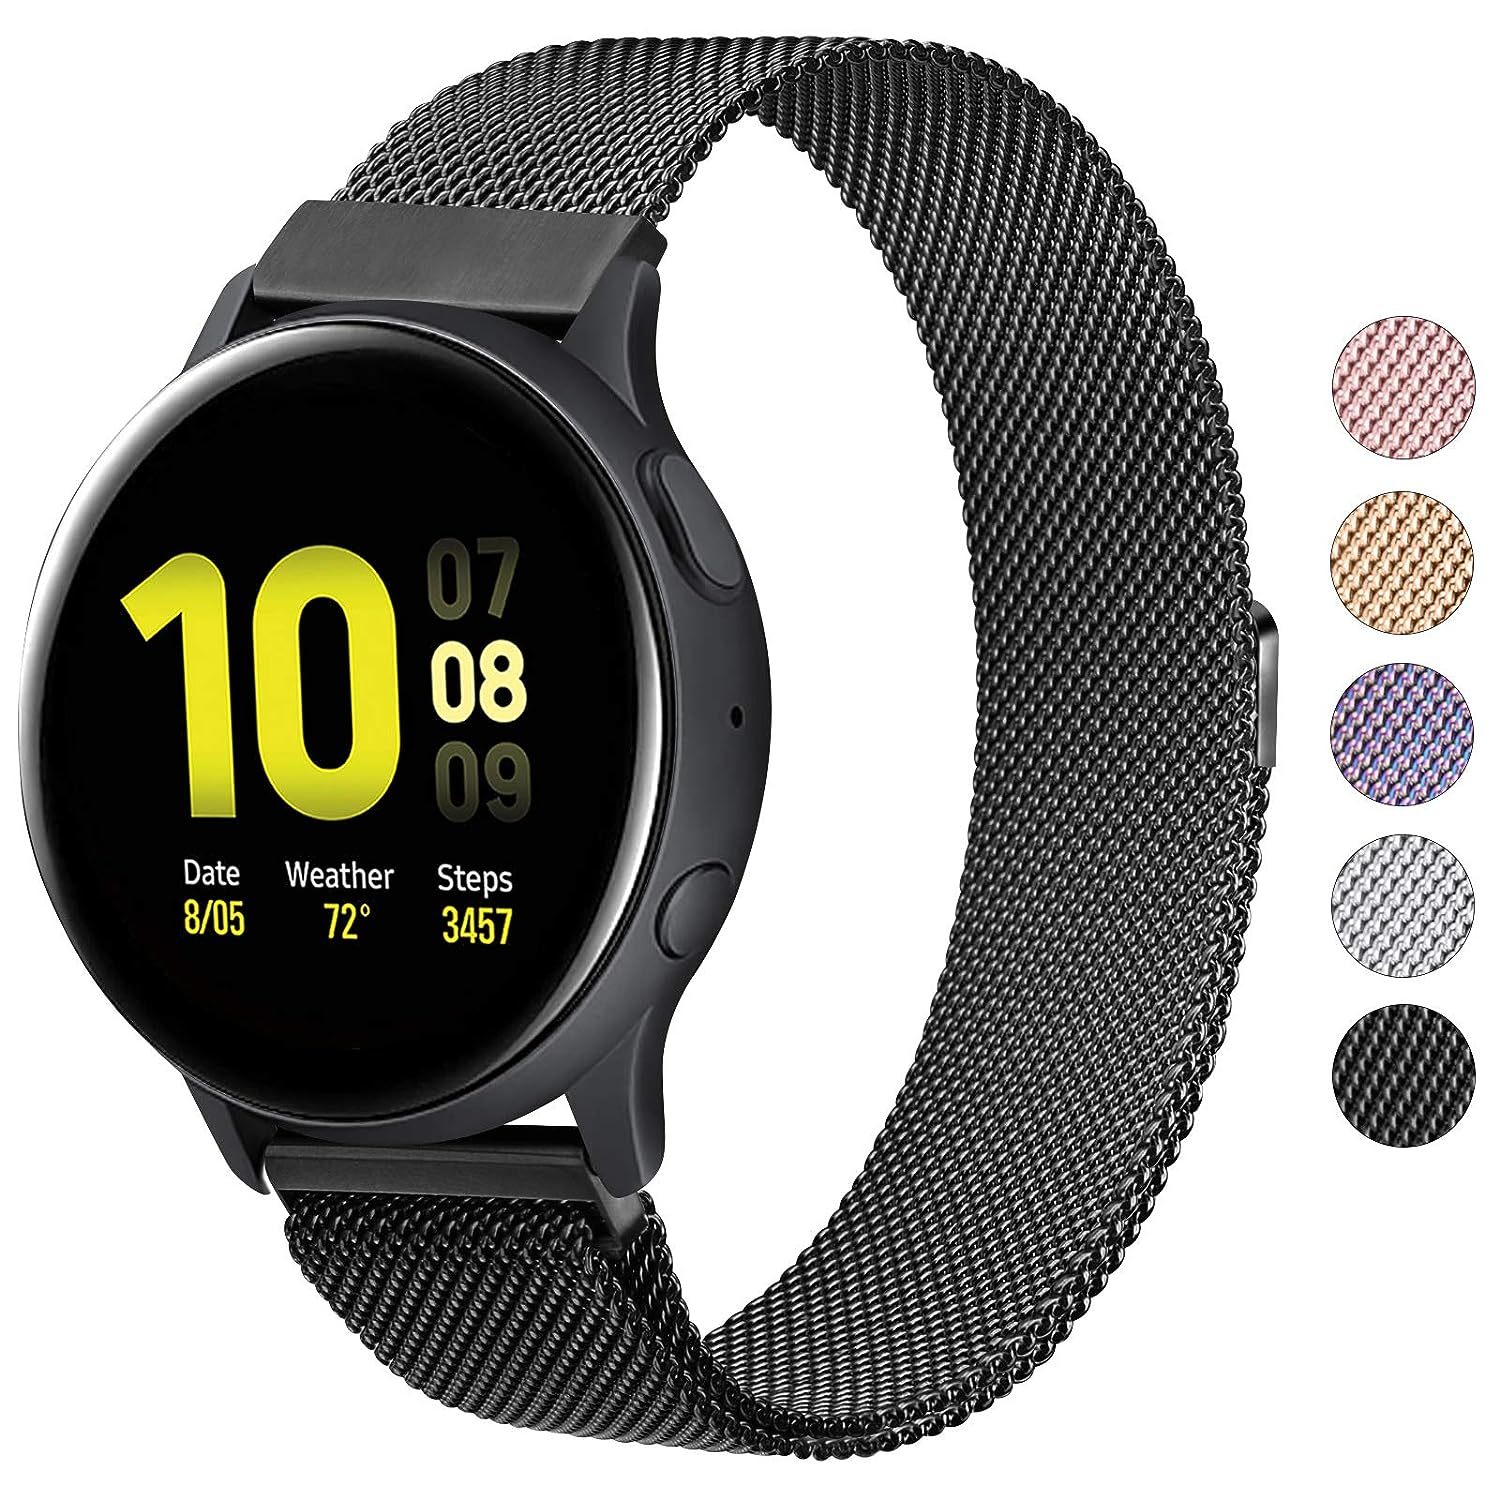 Primary image for Metal Bands For Samsung Galaxy Watch Active 2 Band, Galaxy Watch 4 / Galaxy Watc